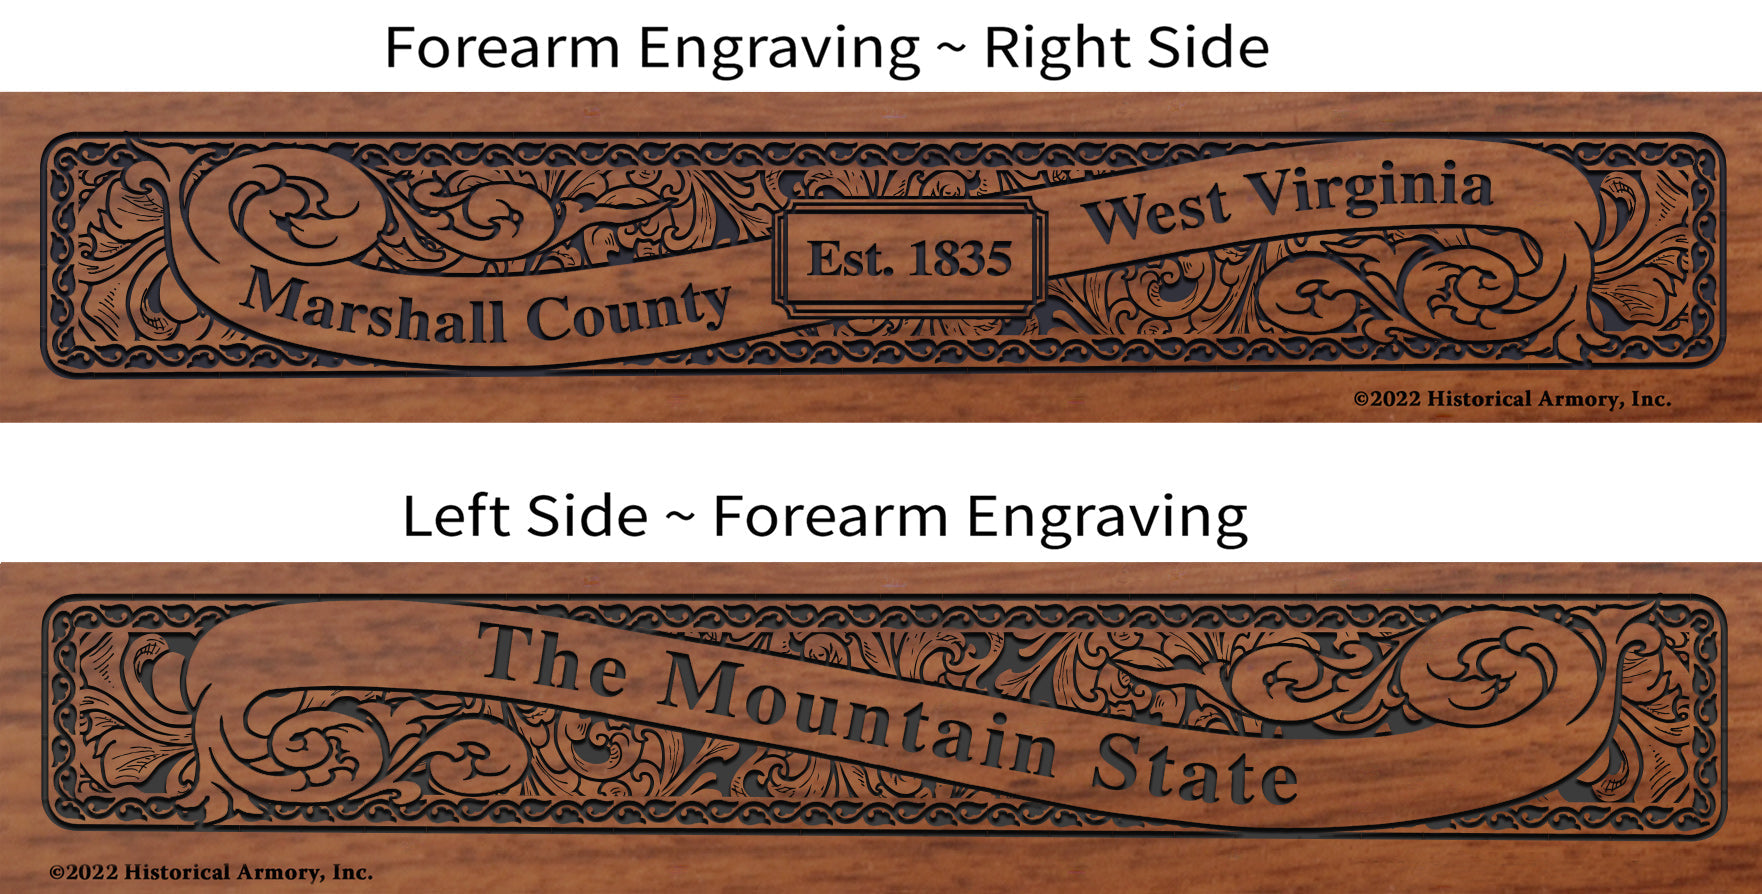 Marshall County West Virginia Engraved Rifle Forearm